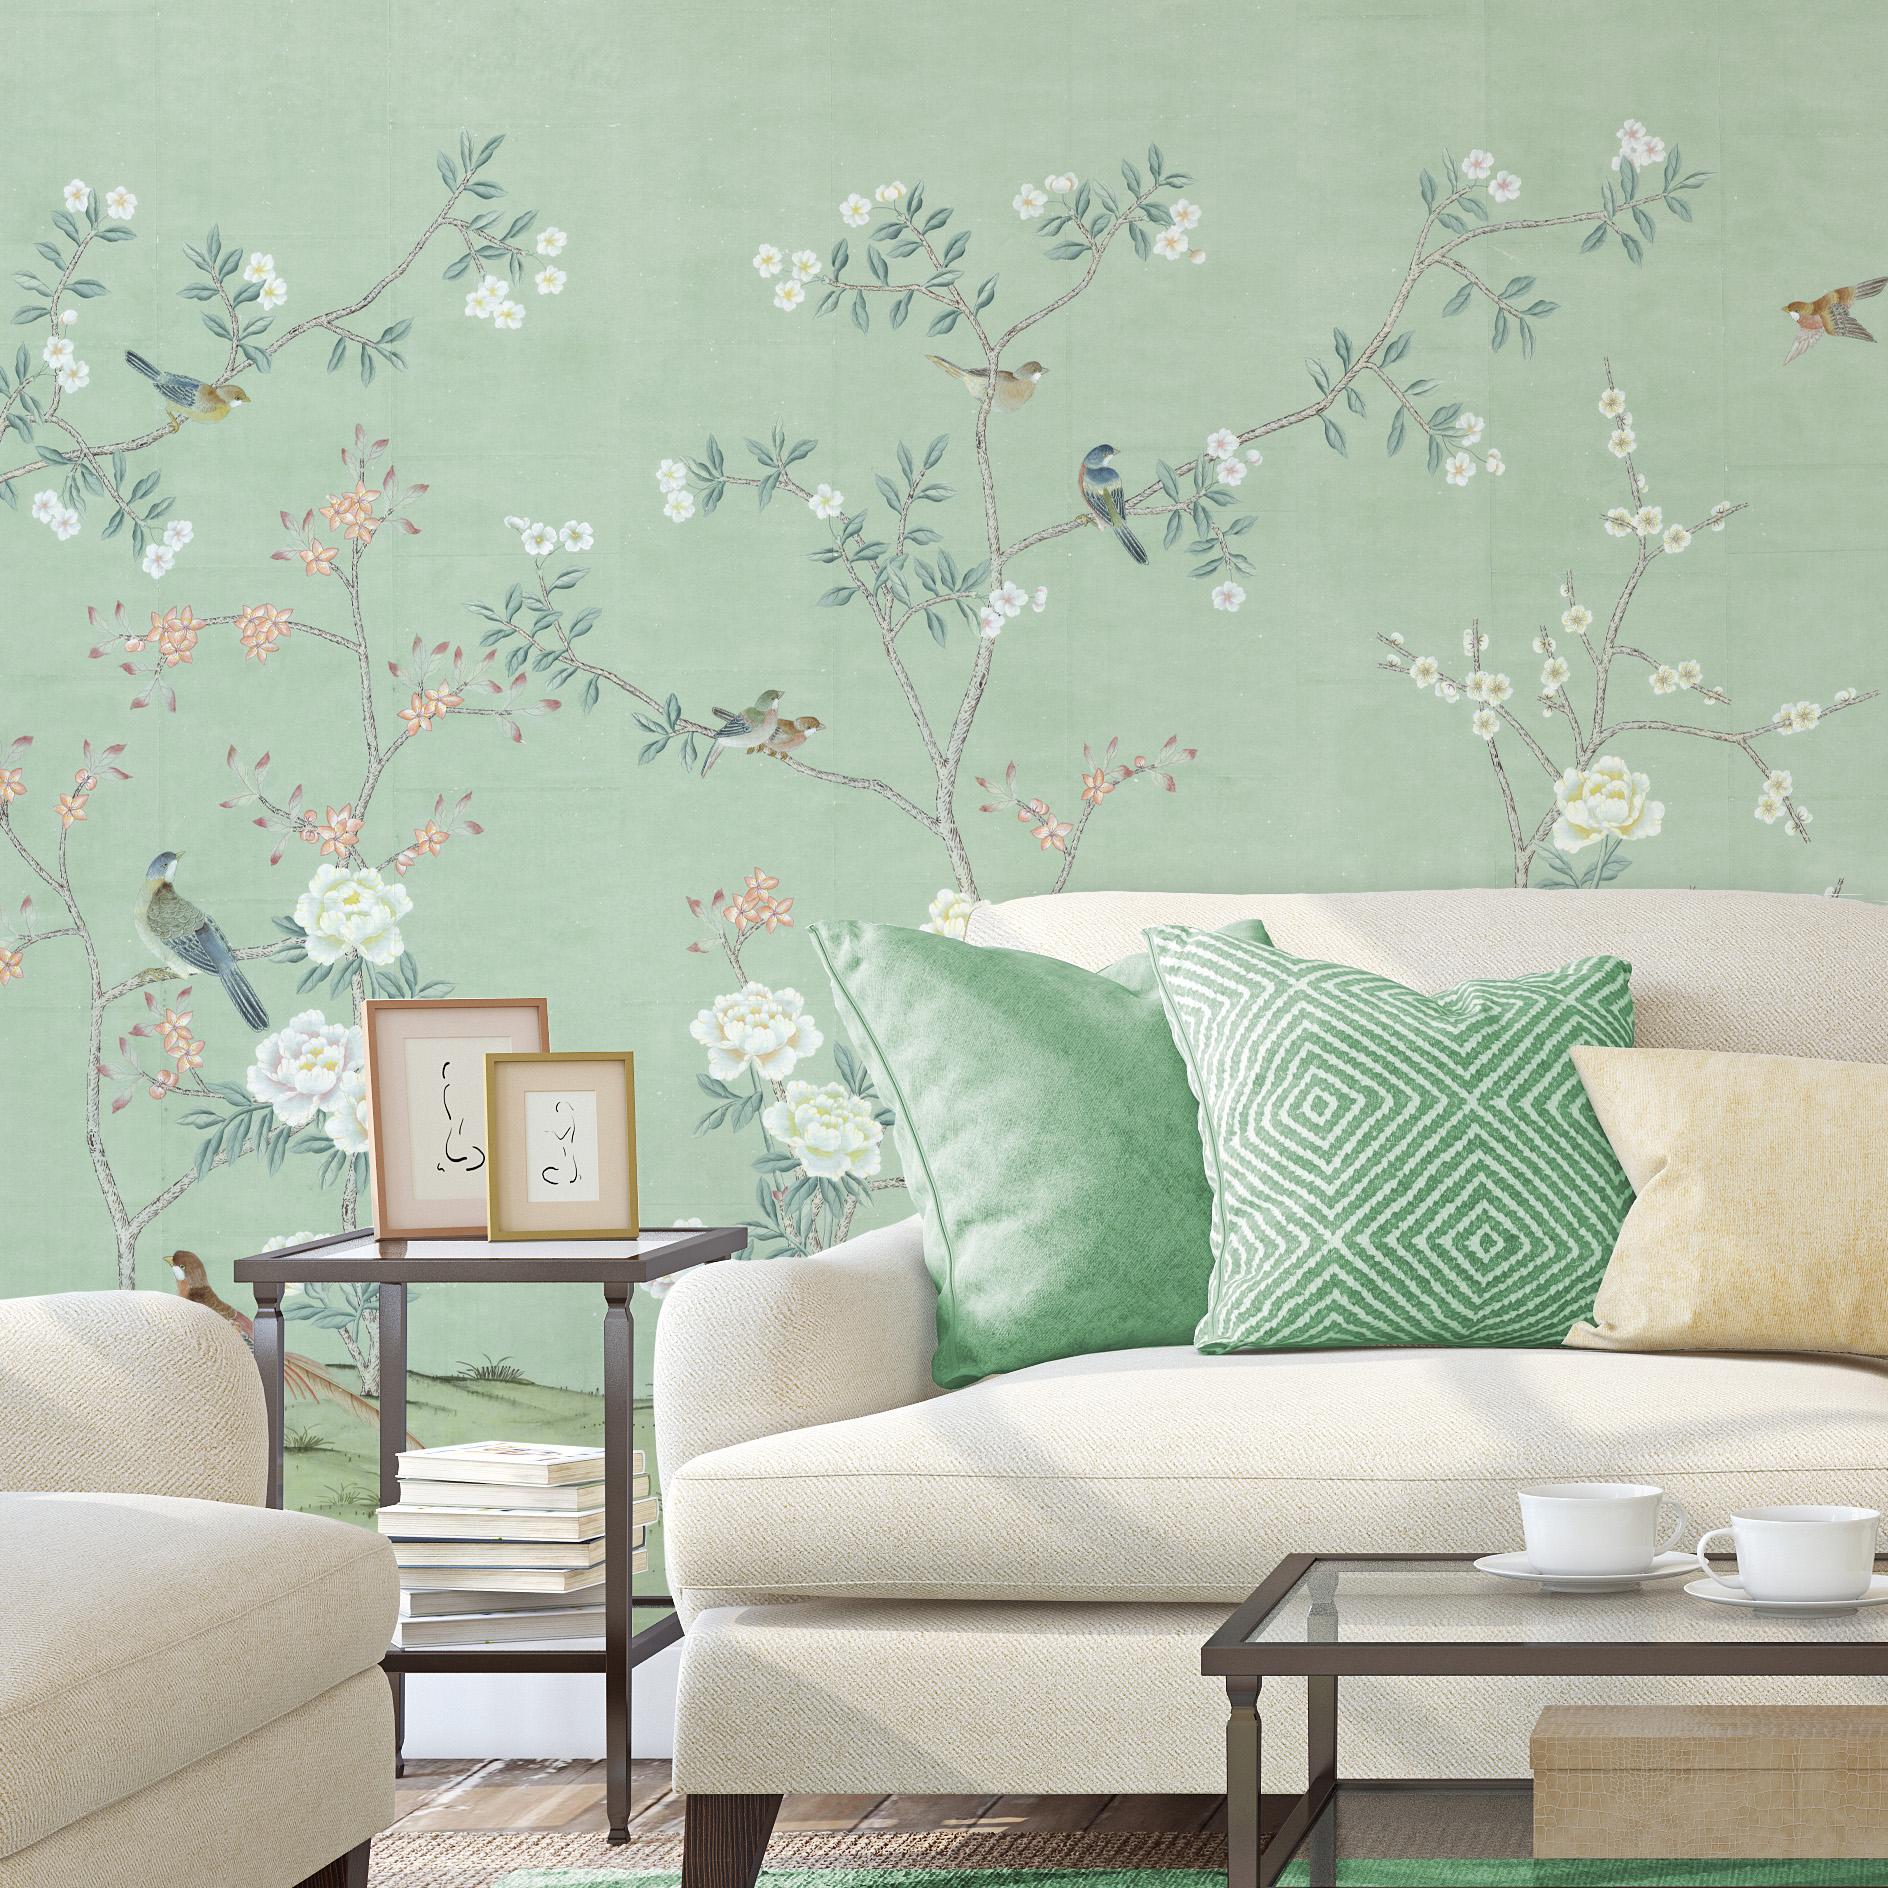 Maysong Sea Mist is a beautiful chinoiserie mural wallpaper with large white blooms on a striking green background. This design can add visual interest or color to any bedroom, living room, or any room in your apartment or home. This  mural has 4